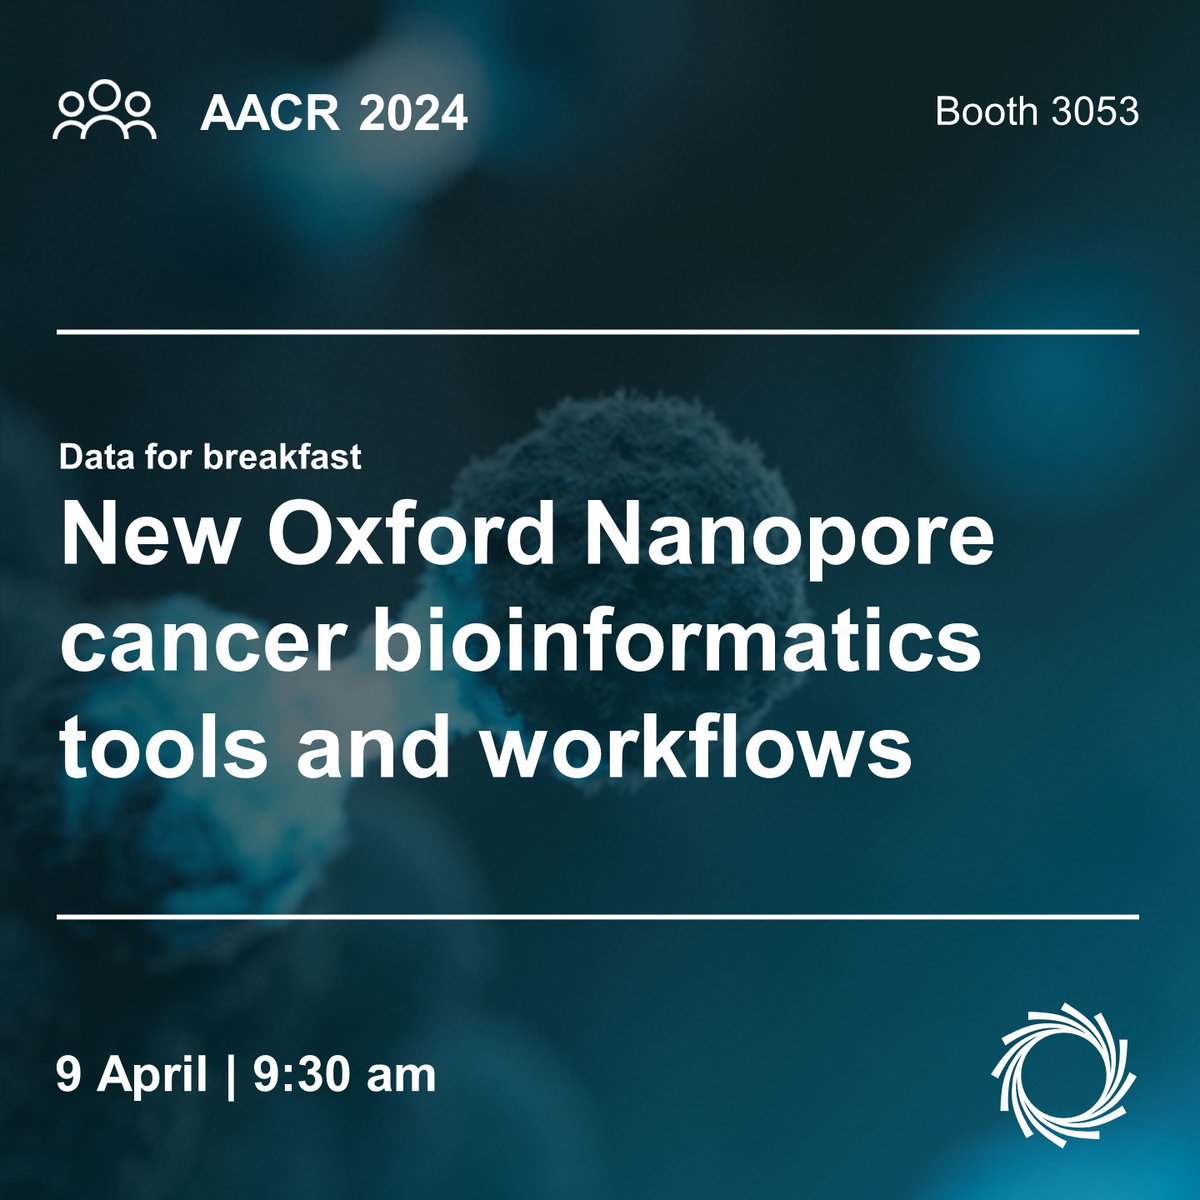 Join us for today's Data for breakfast session at #AACR24. Grab a coffee, hear about the advanced cancer bioinformatic tools available for nanopore sequencing data analysis. Come see what you've been missing. #WYMM #AACR